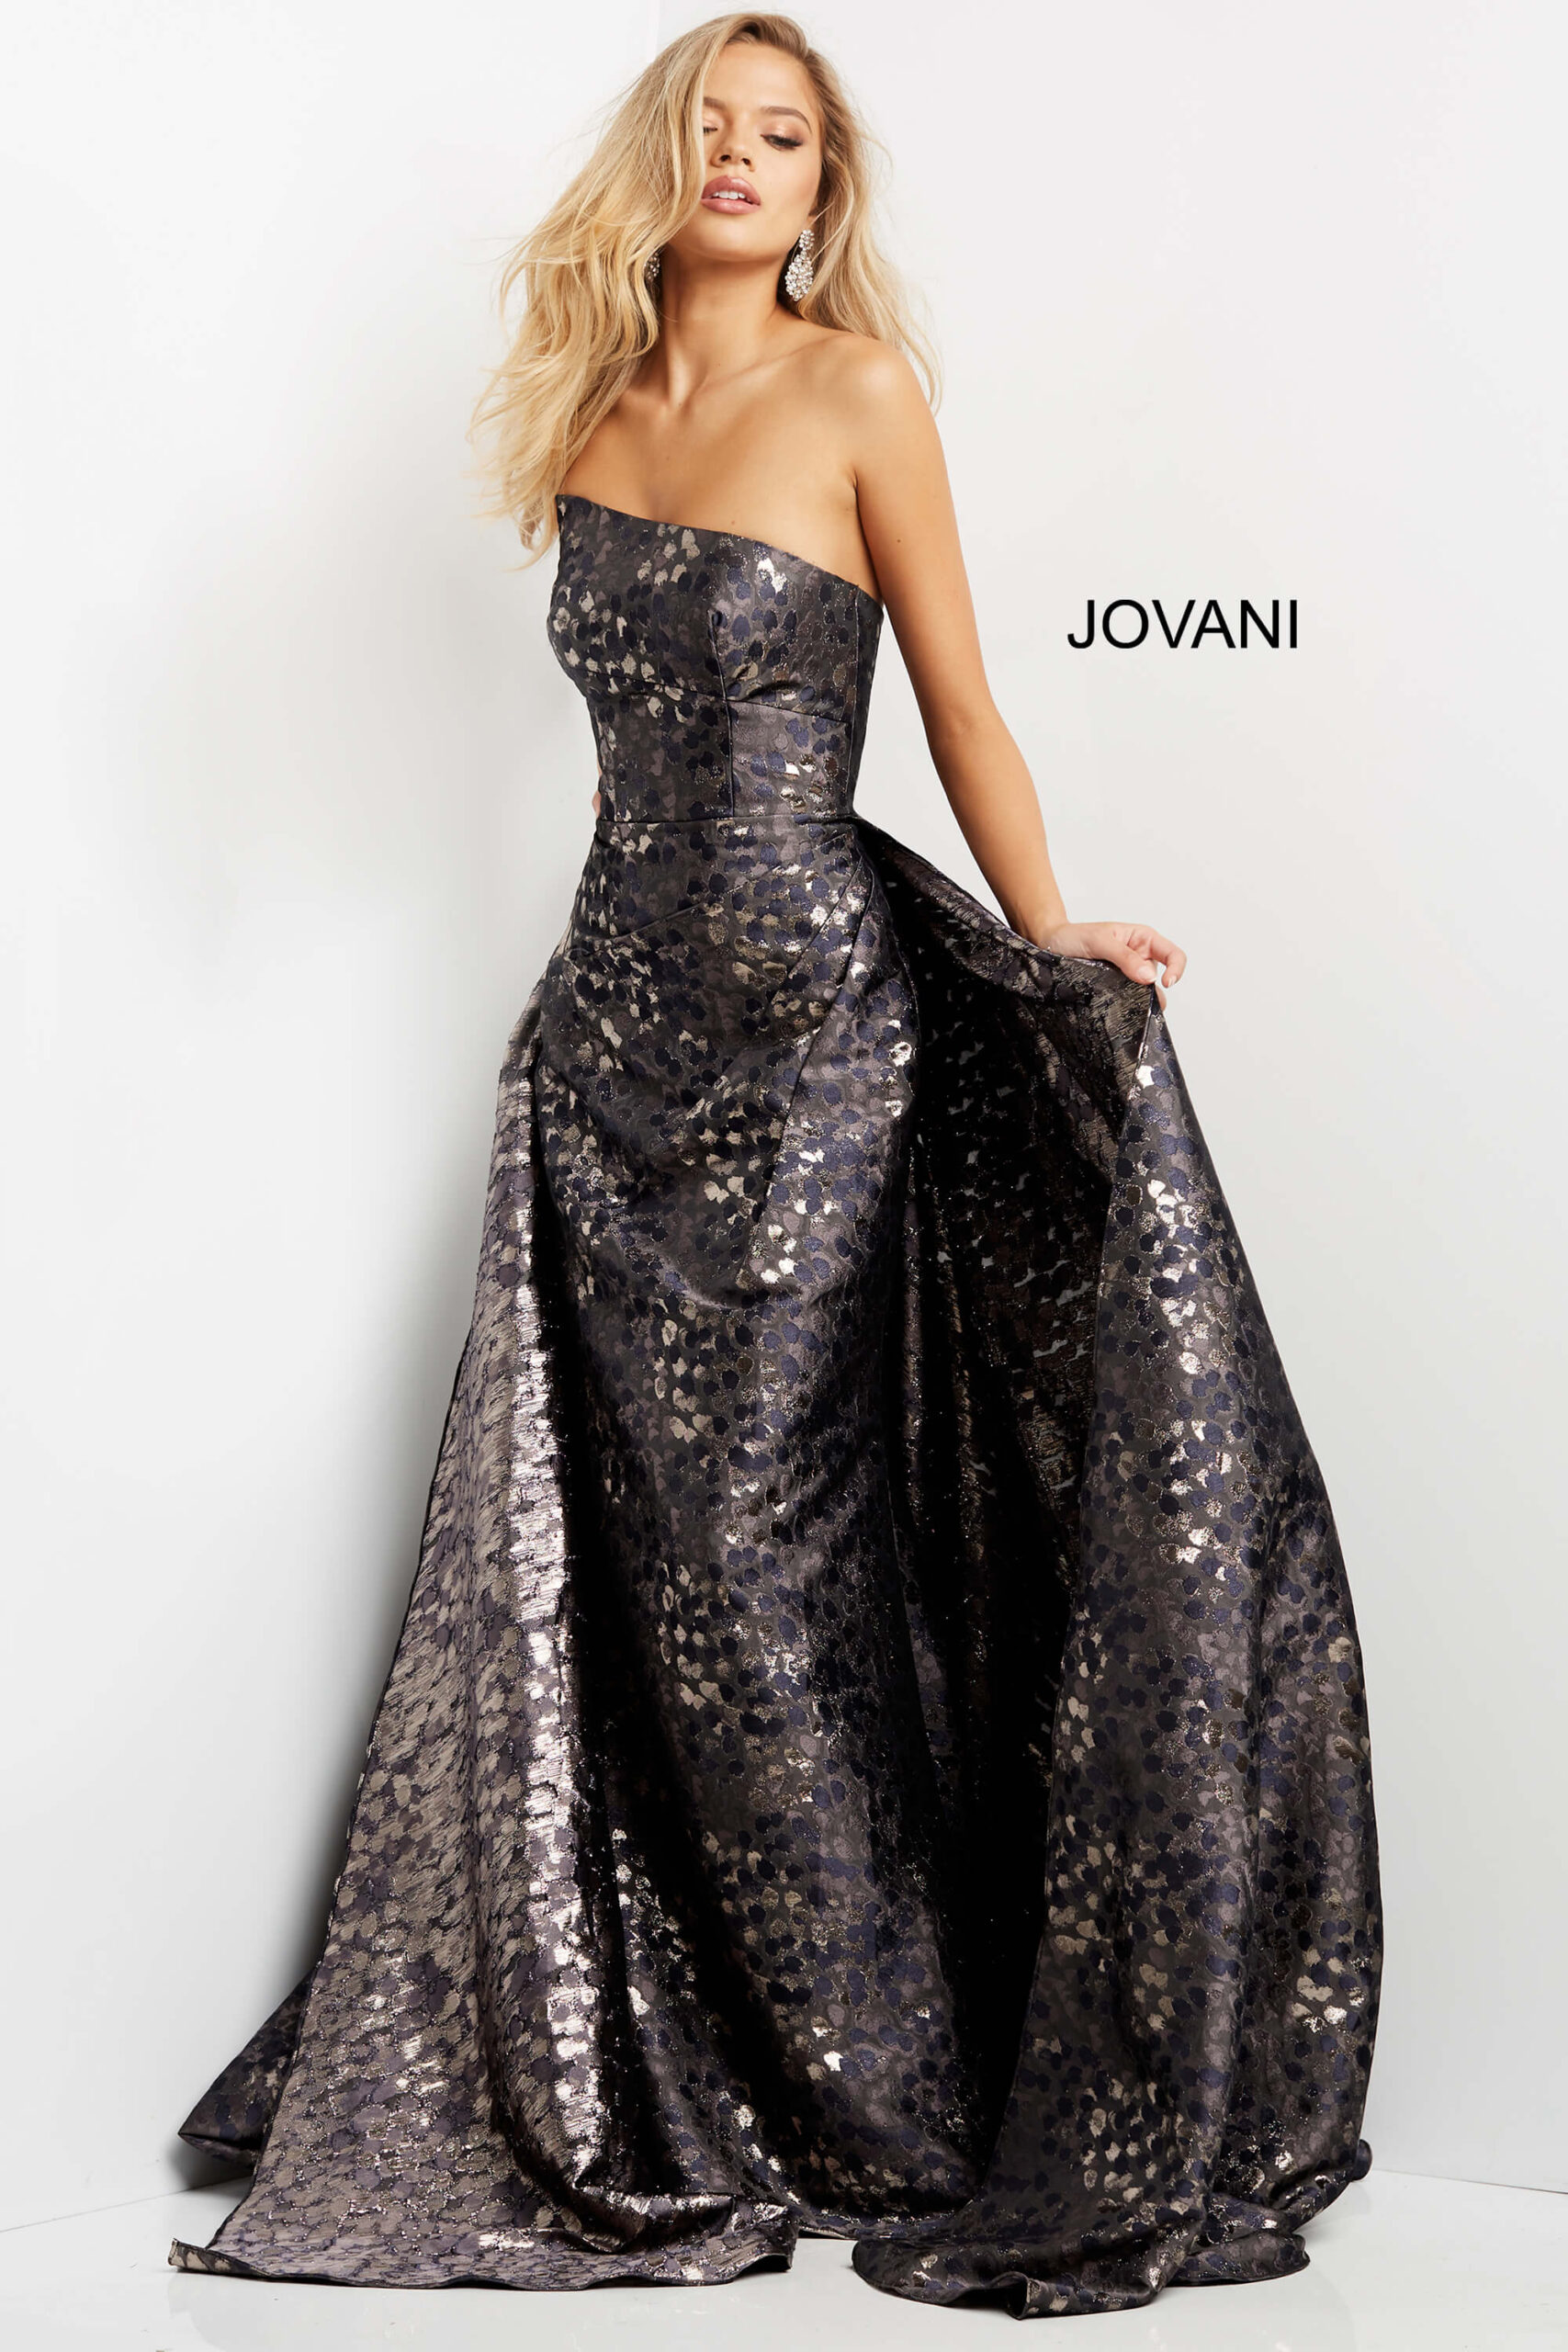 Jovani 06255 Grey Brown Strapless Fitted Evening Dress